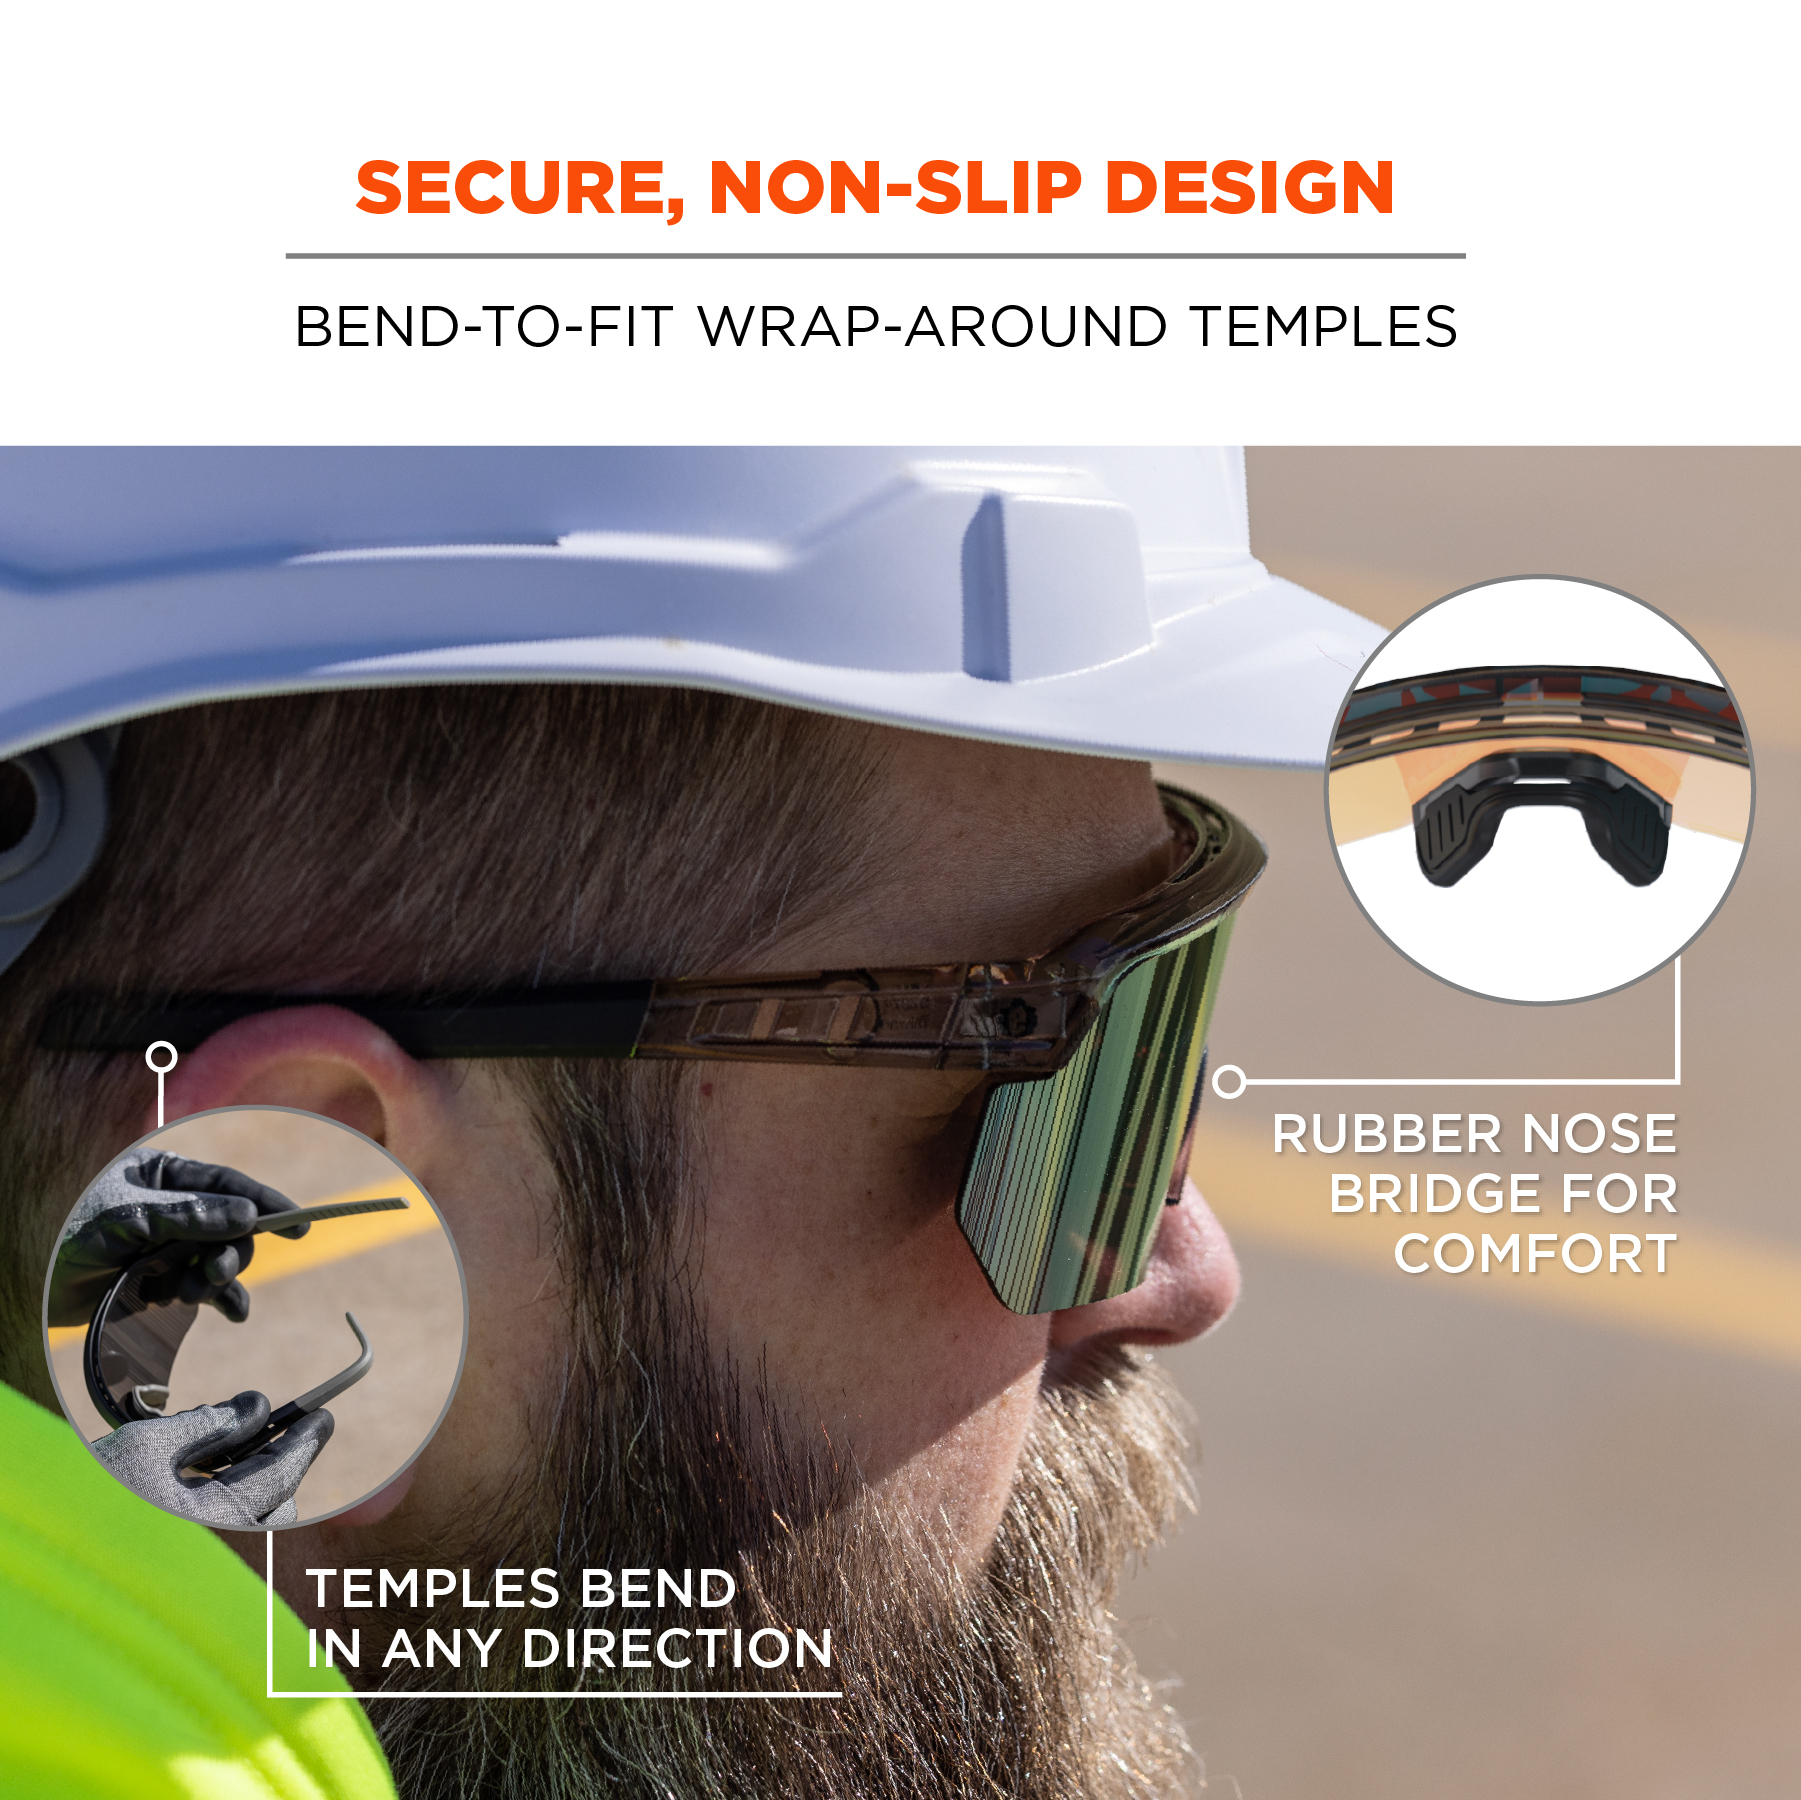 Safety Glasses & Sunglasses - Clear, Smoked, Polarized